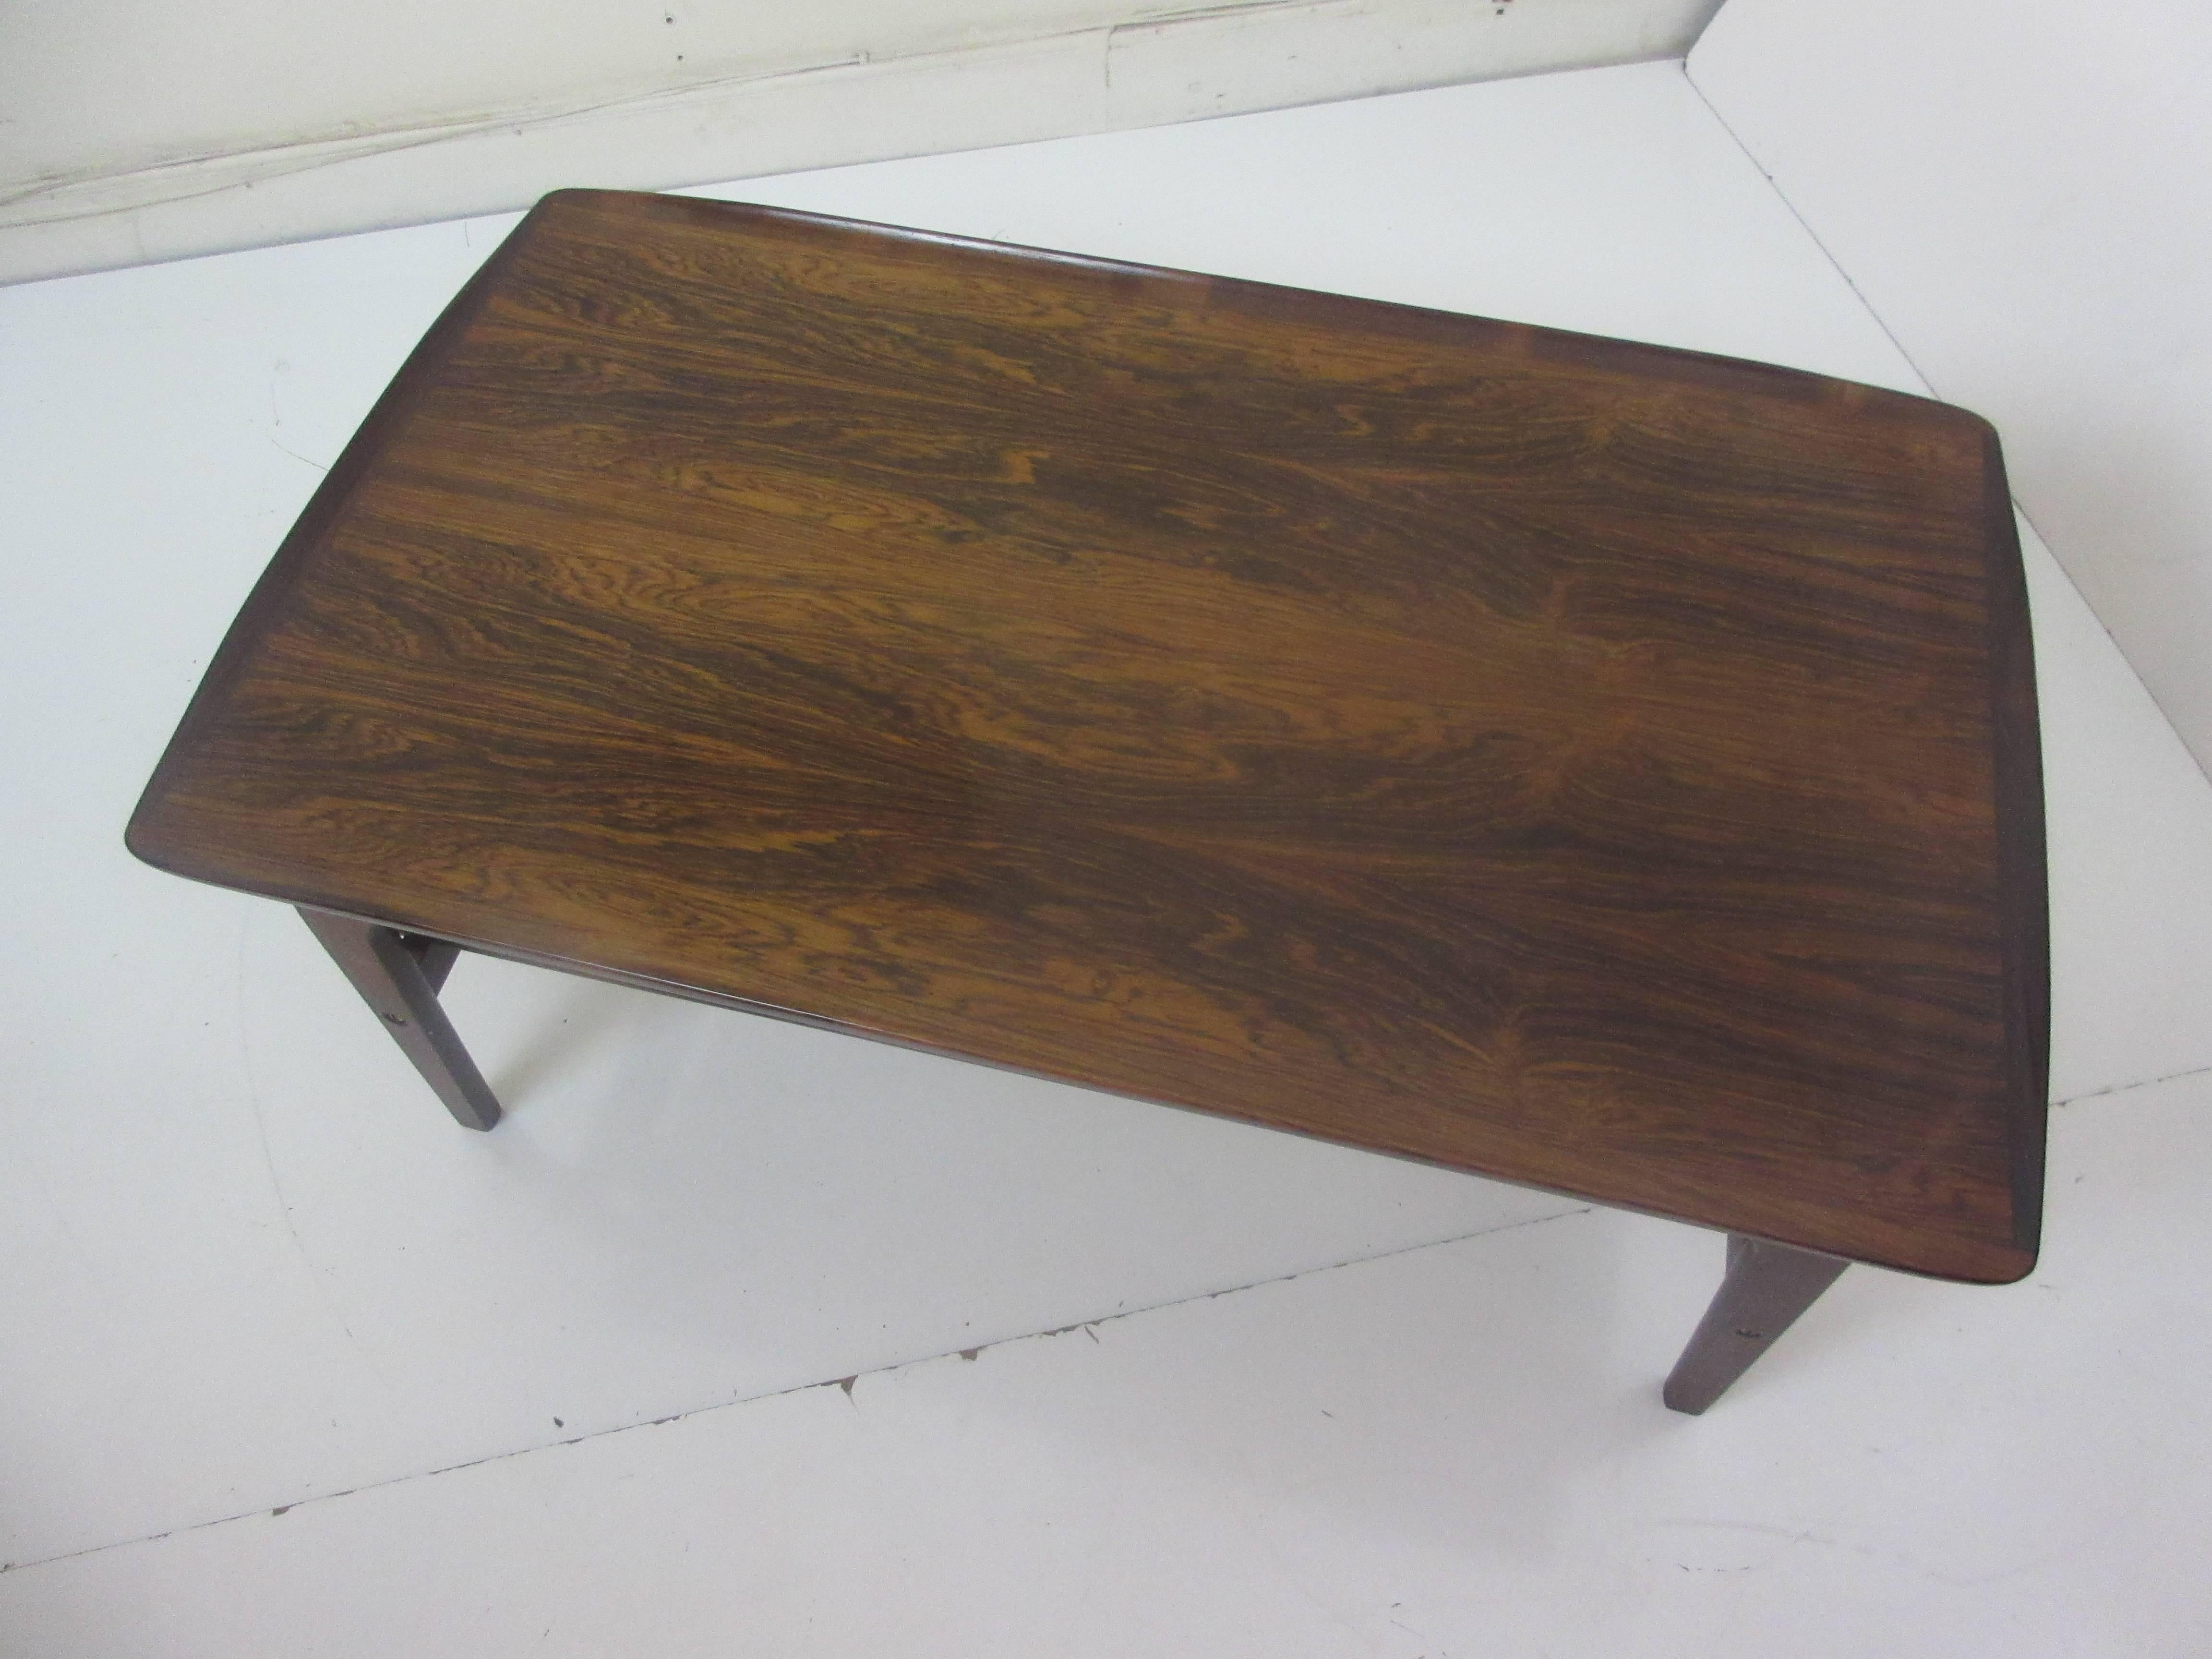 Peter Hvidt for John Stuart rosewood coffee table with canned magazine rack. Rosewood of exceptional graining. Modern piecrust type edge with floating top supported by brass spacers. Canning recently replaced. Bought from original owner,.